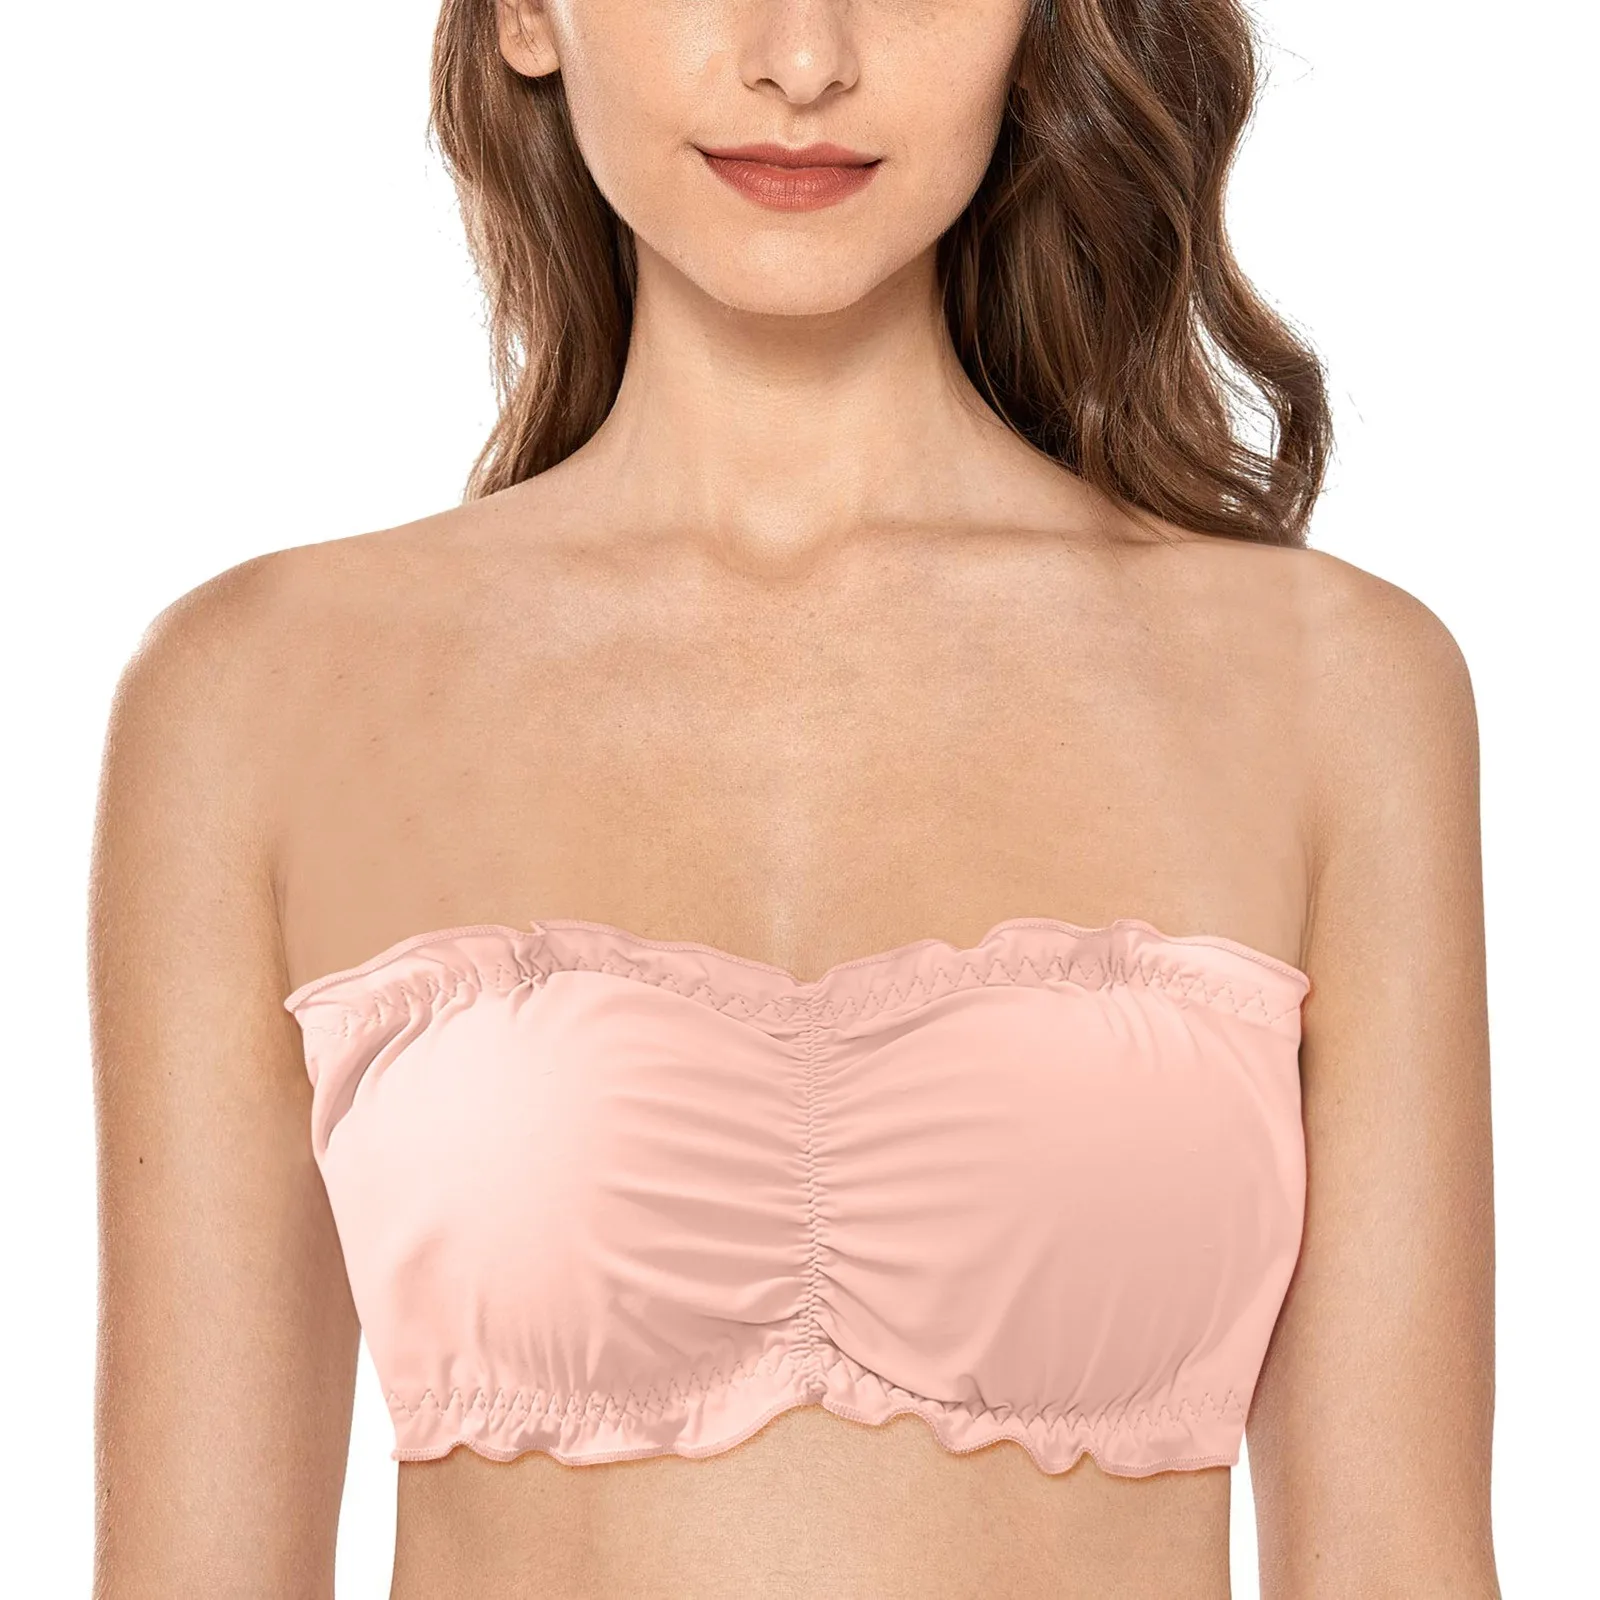  Strapless Bandeau Bra for Small Chested Women